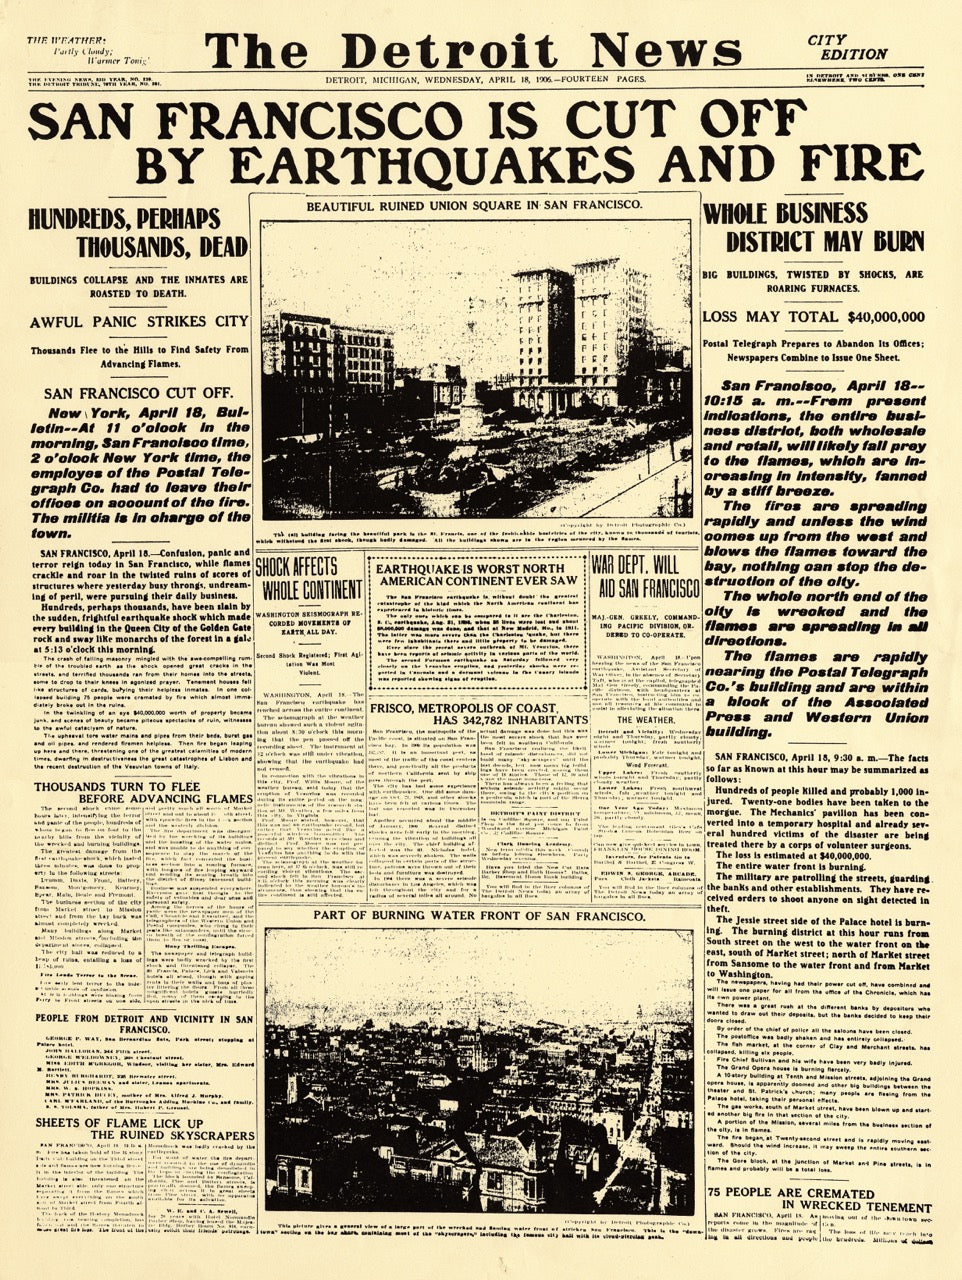 Front Pages- San Francisco Is Cut Off By Earthquakes and Fire